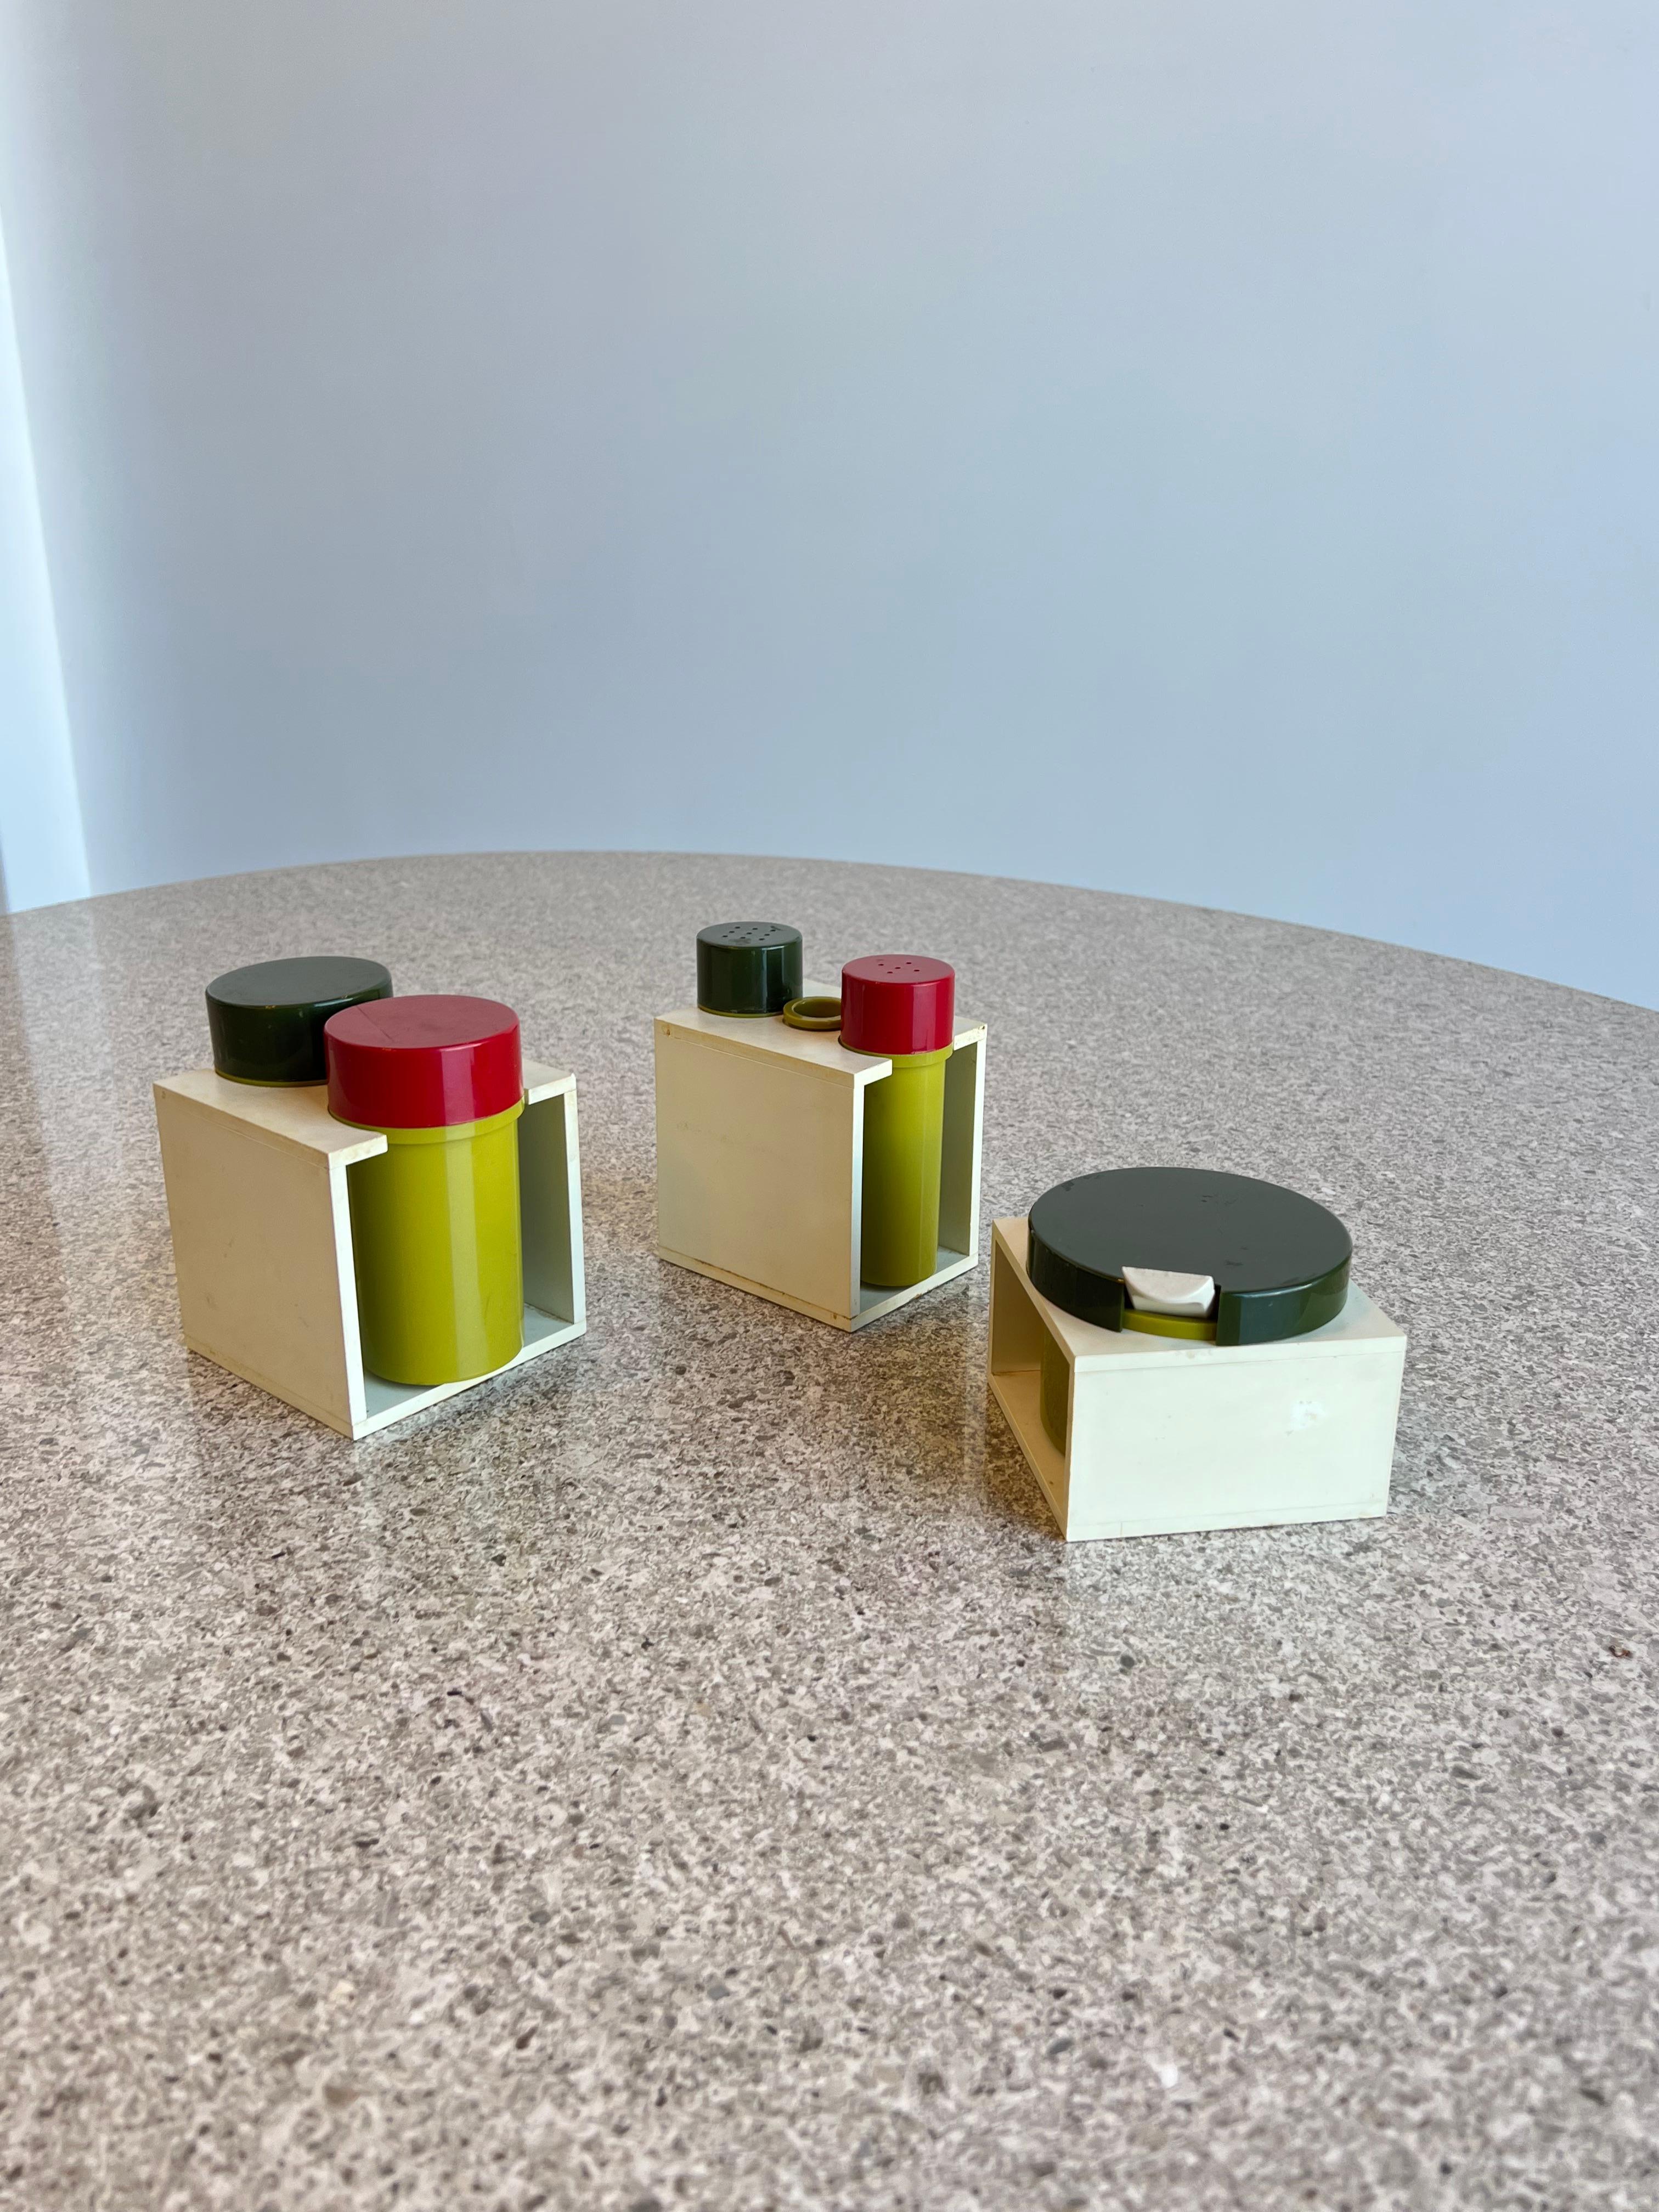 Unique Italian kitchen set from Desco Al Ma Rose Design by A. Salviato 1960s.
Olive oil and balsamic containers. Salt and pepper containers. Sugar container.